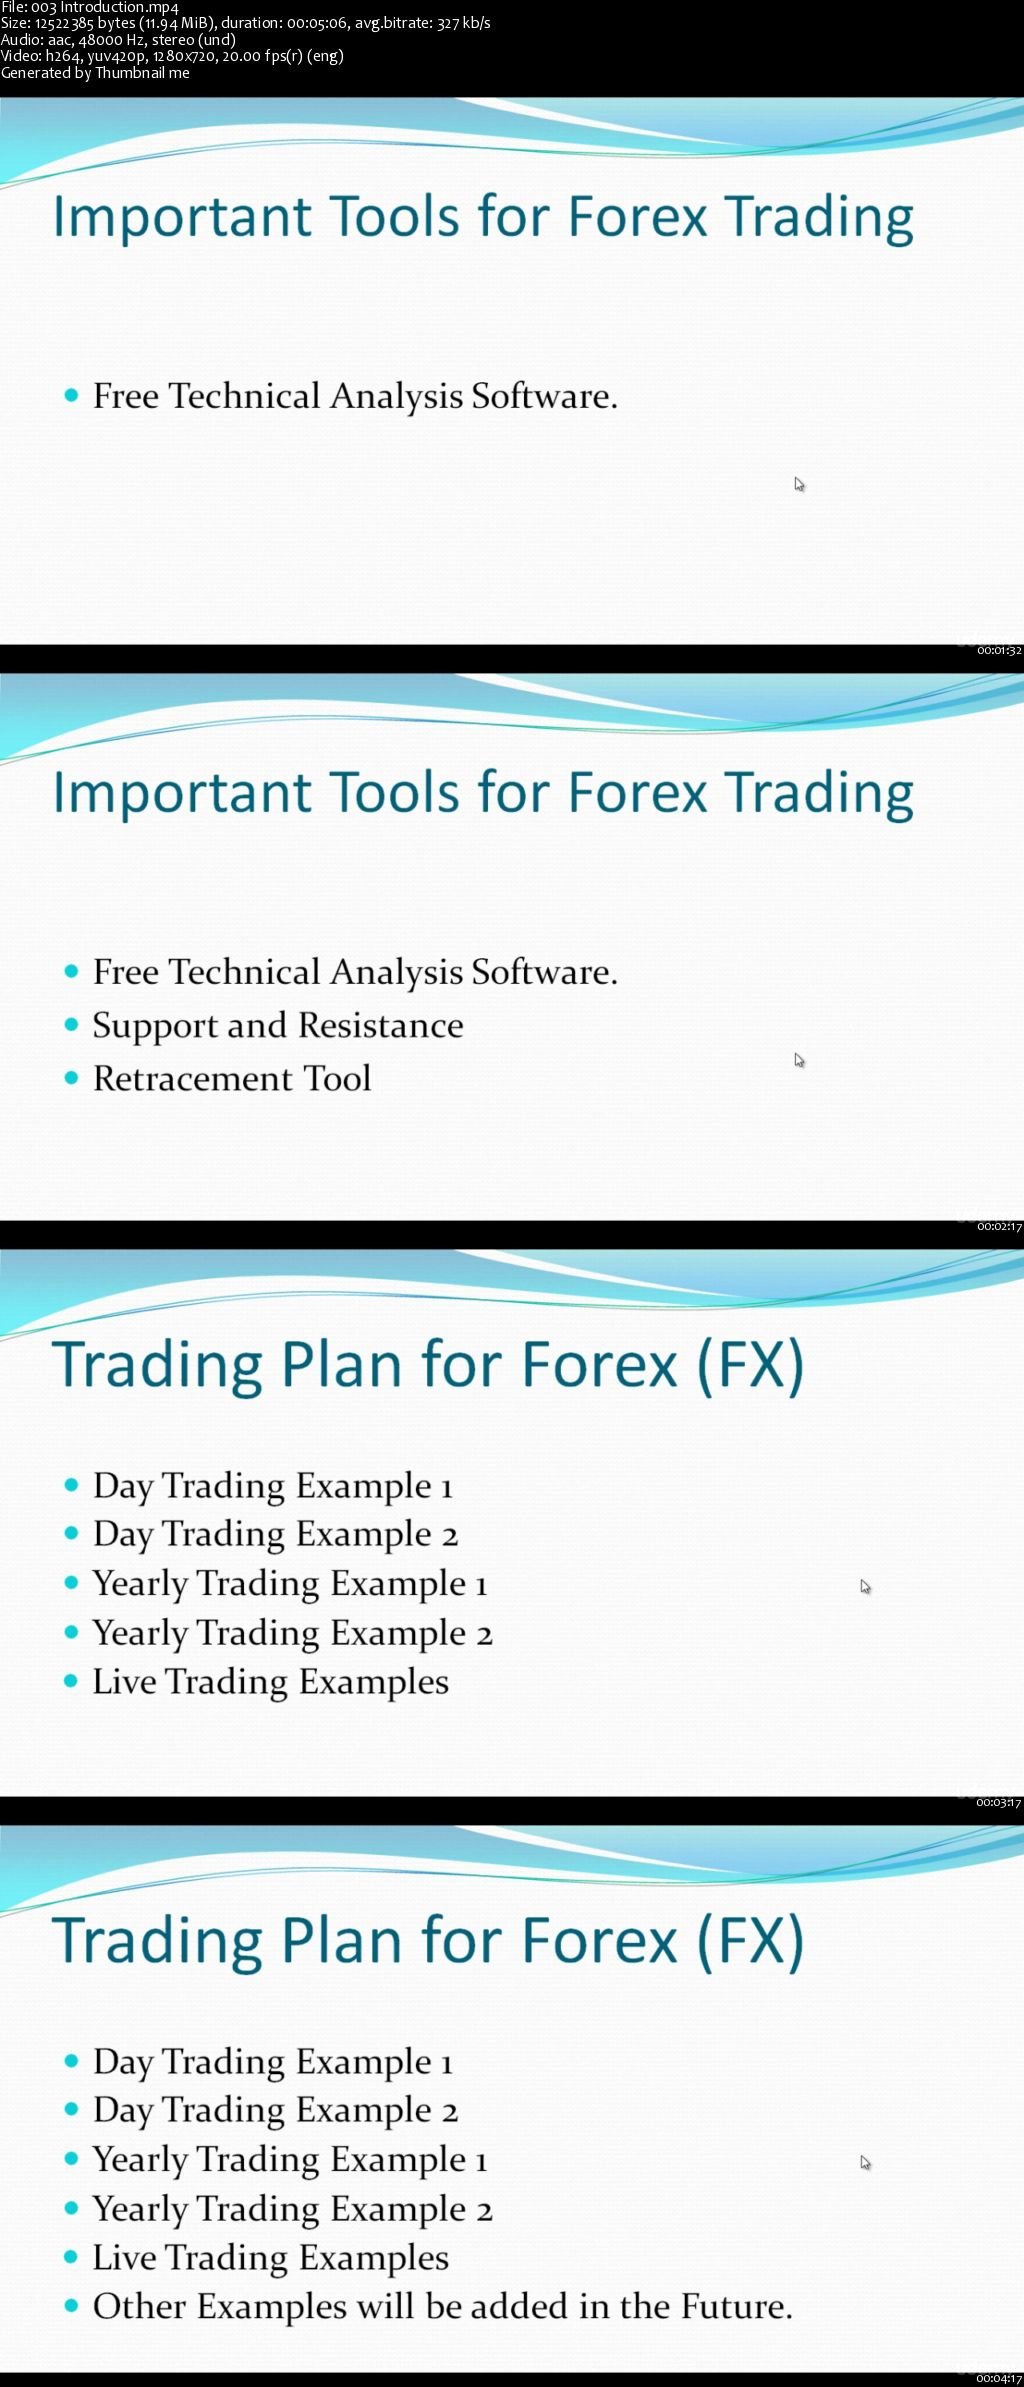 Download Winning Forex Trading With Live Forex Trading Examples - 